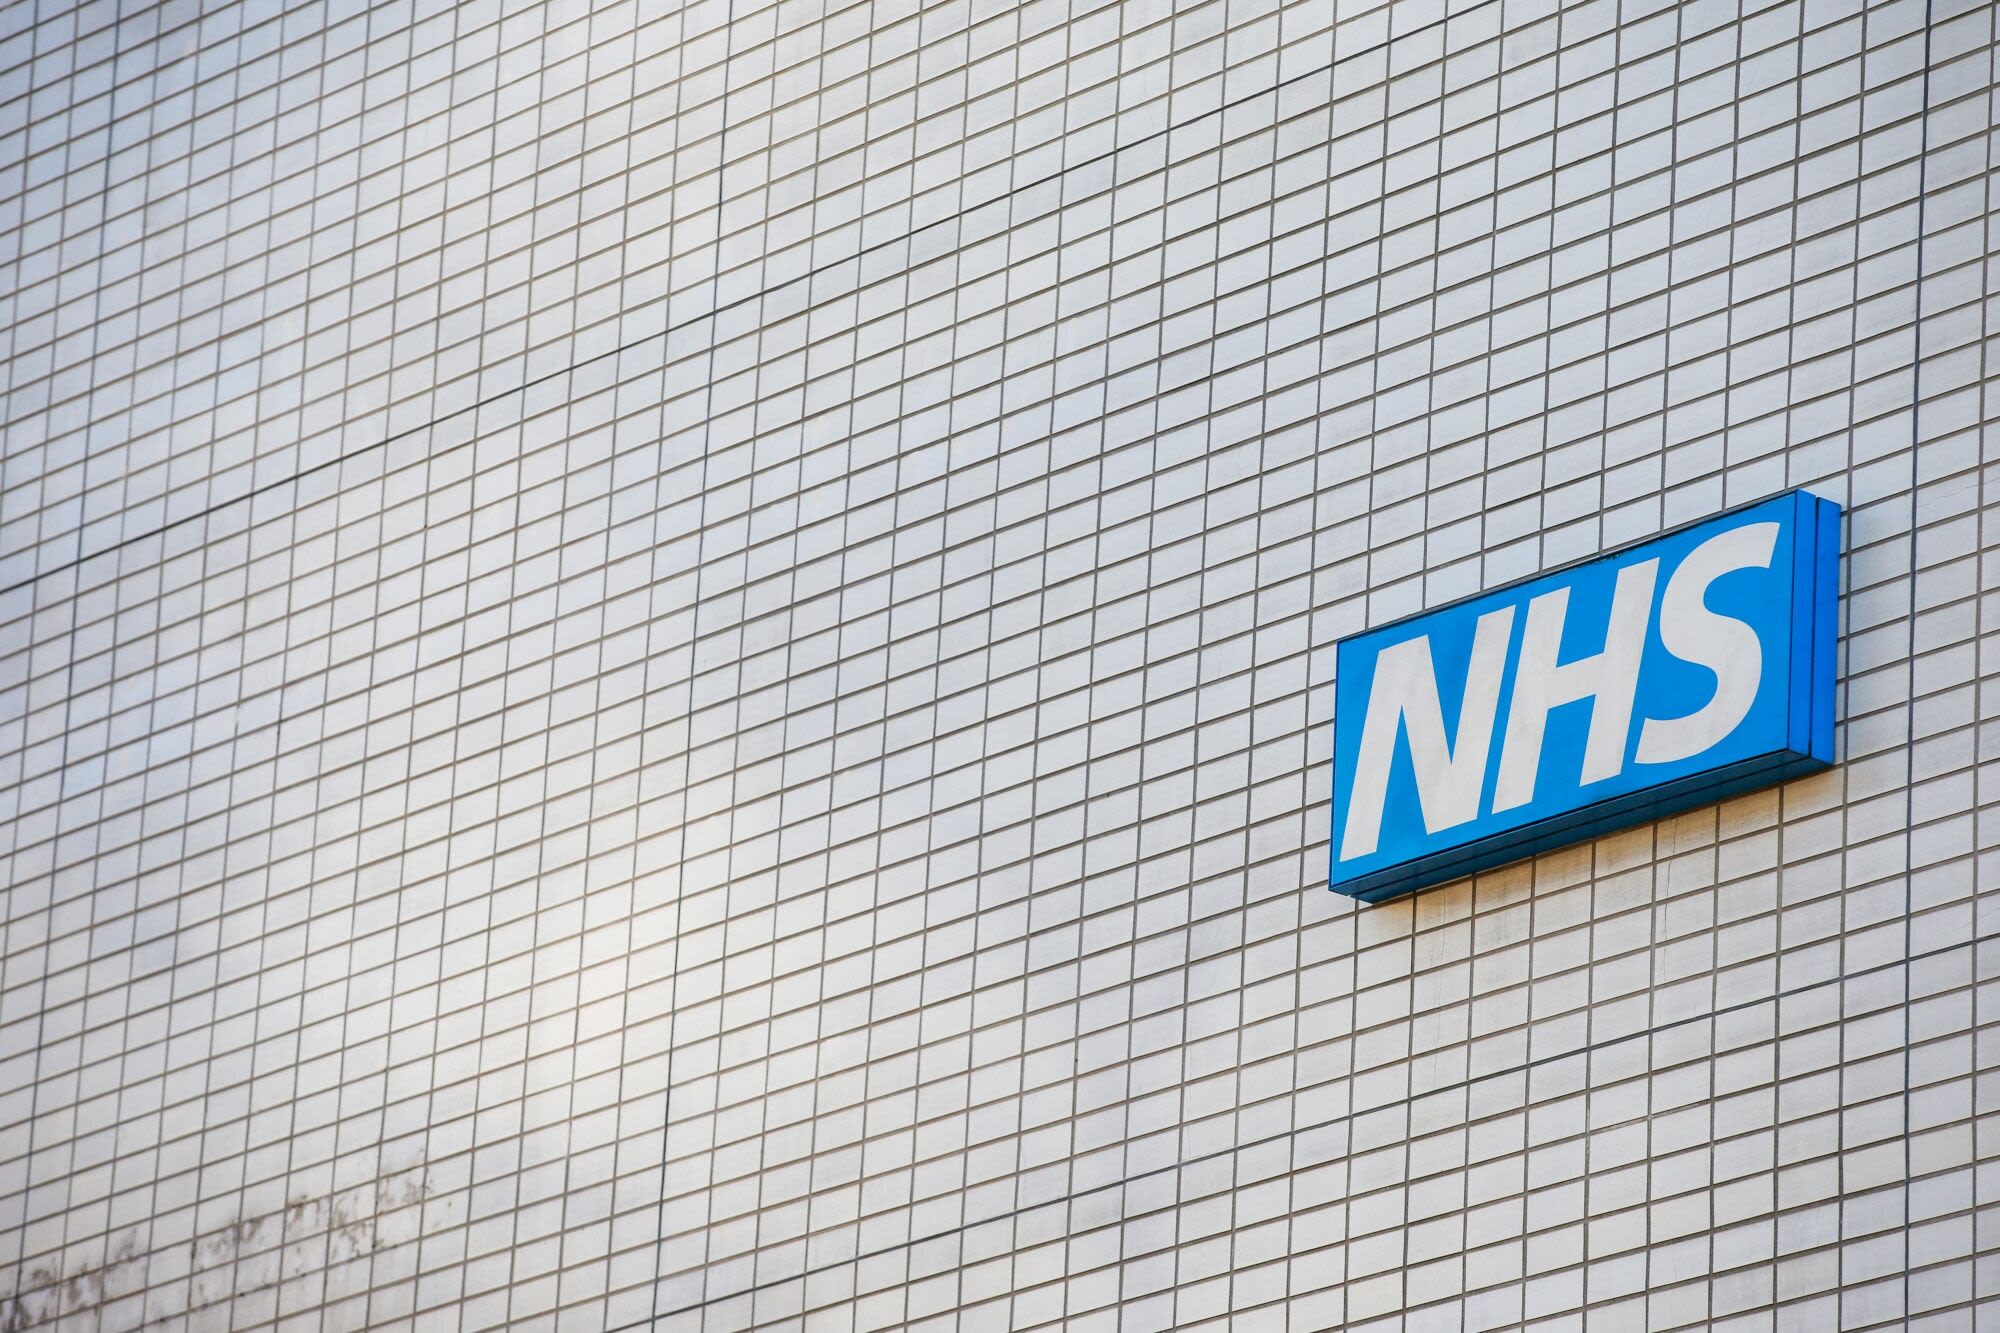 Hack That Crippled UK Hospitals Highlights Growing Threat to NHS